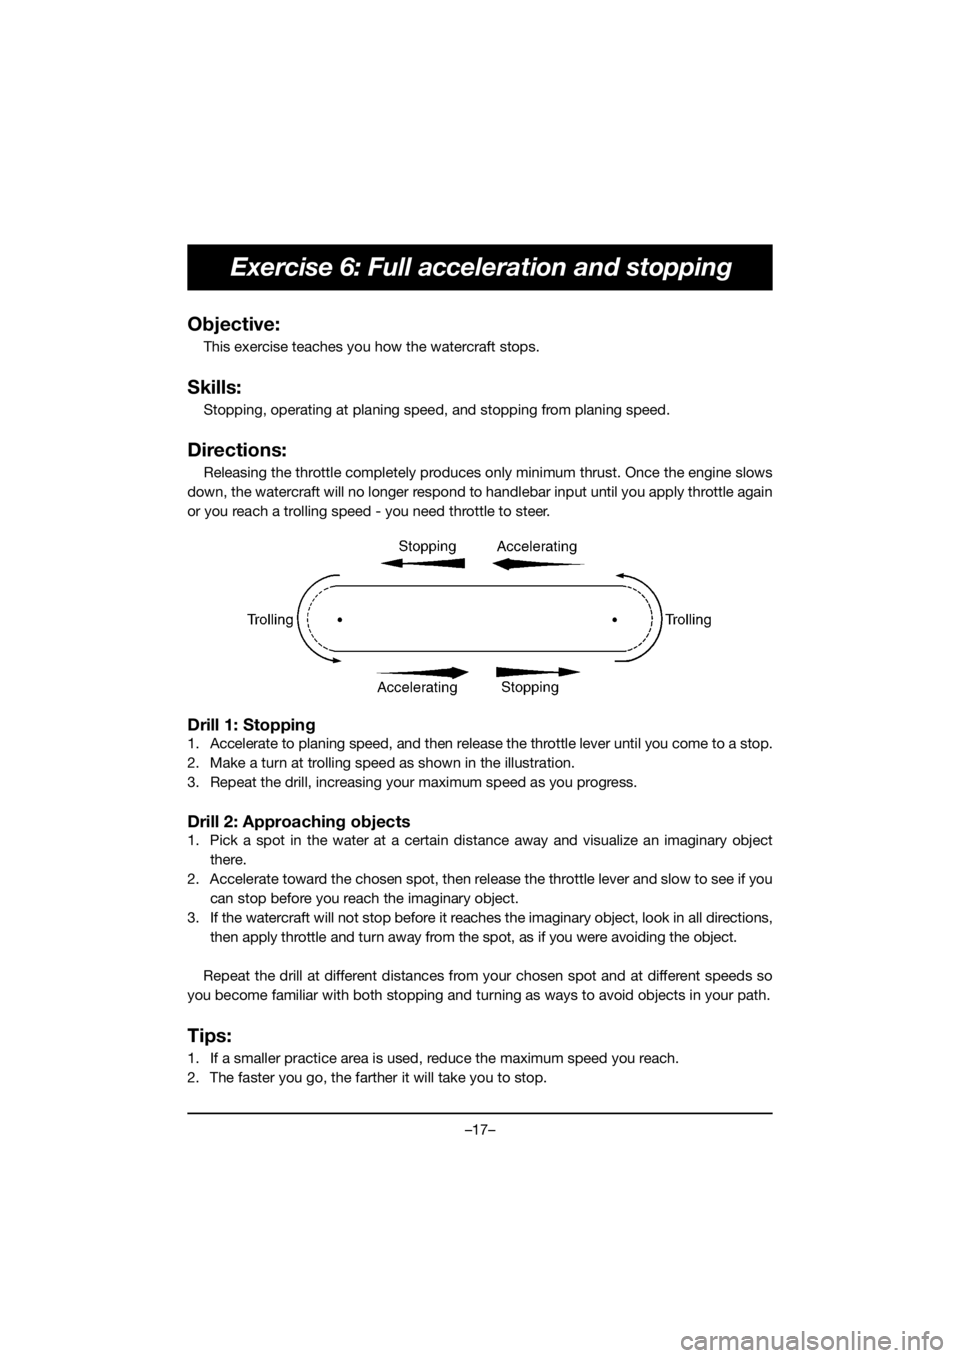 YAMAHA EXR 2020 Owners Manual –17–
Exercise 6: Full acceleration and stopping
Objective:
This exercise teaches you how the watercraft stops. 
Skills:
Stopping, operating at planing speed, and stopping from planing speed.
Direc